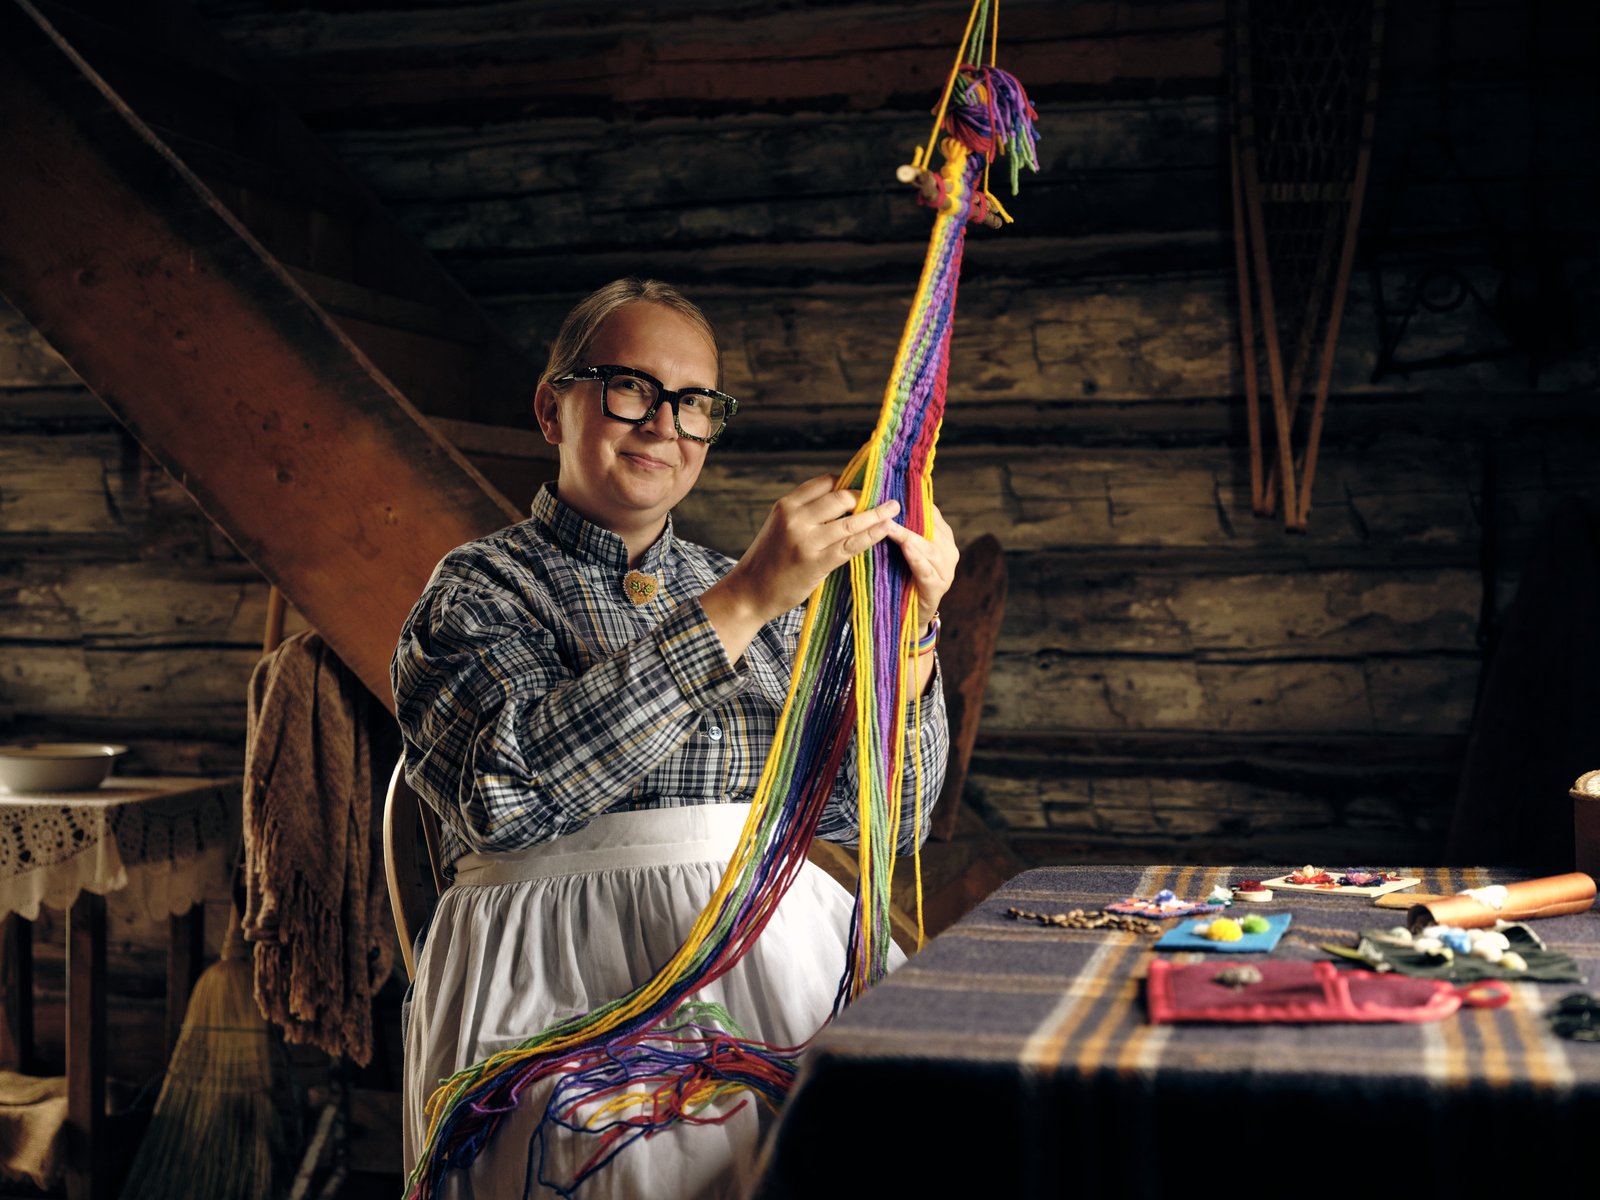 Indigenous women smiling at the camera while sitting and making Indigenous art with colourful string.